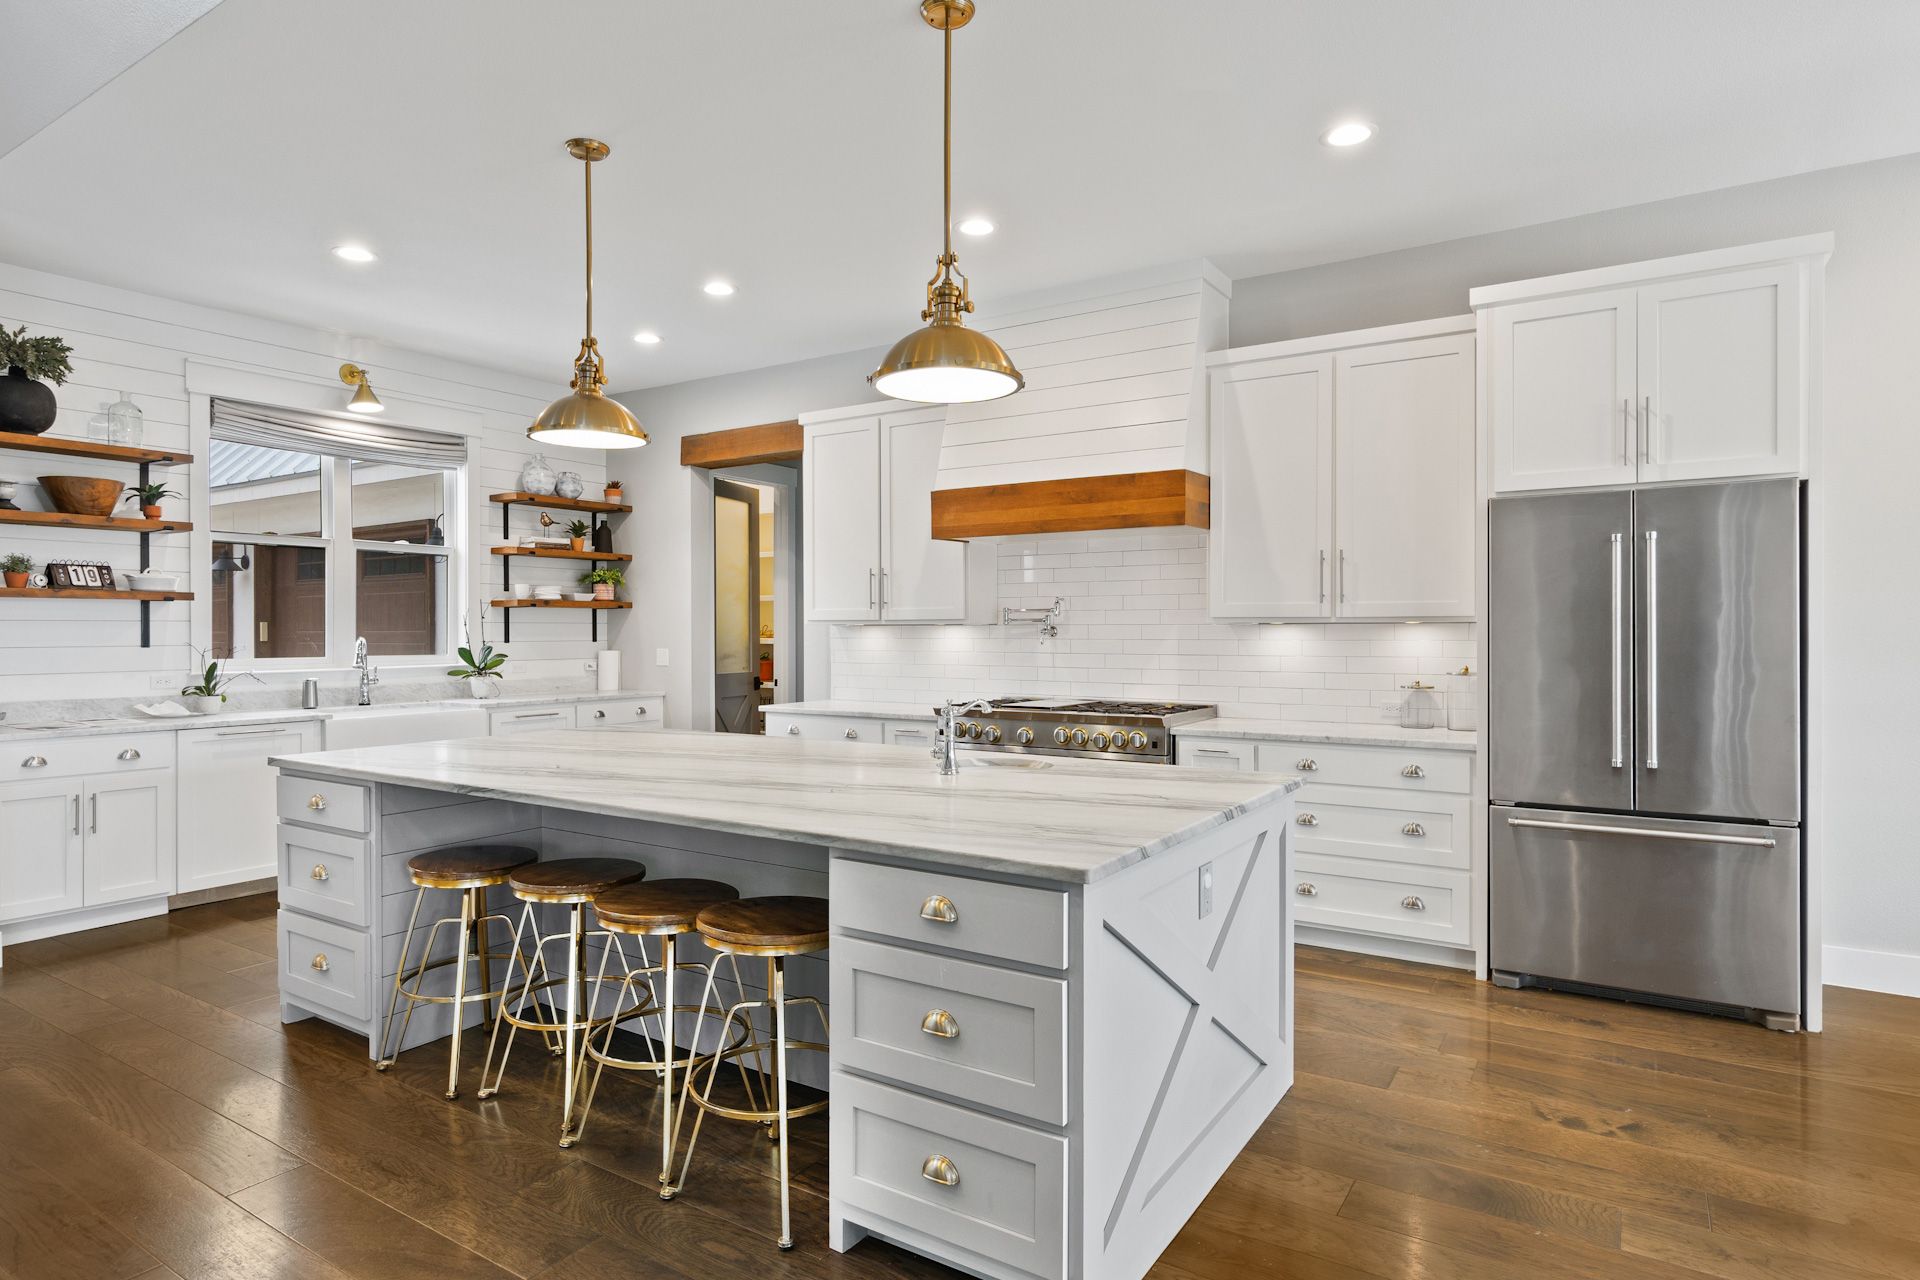 A kitchen with white cabinets, stainless steel appliances, and a large island.